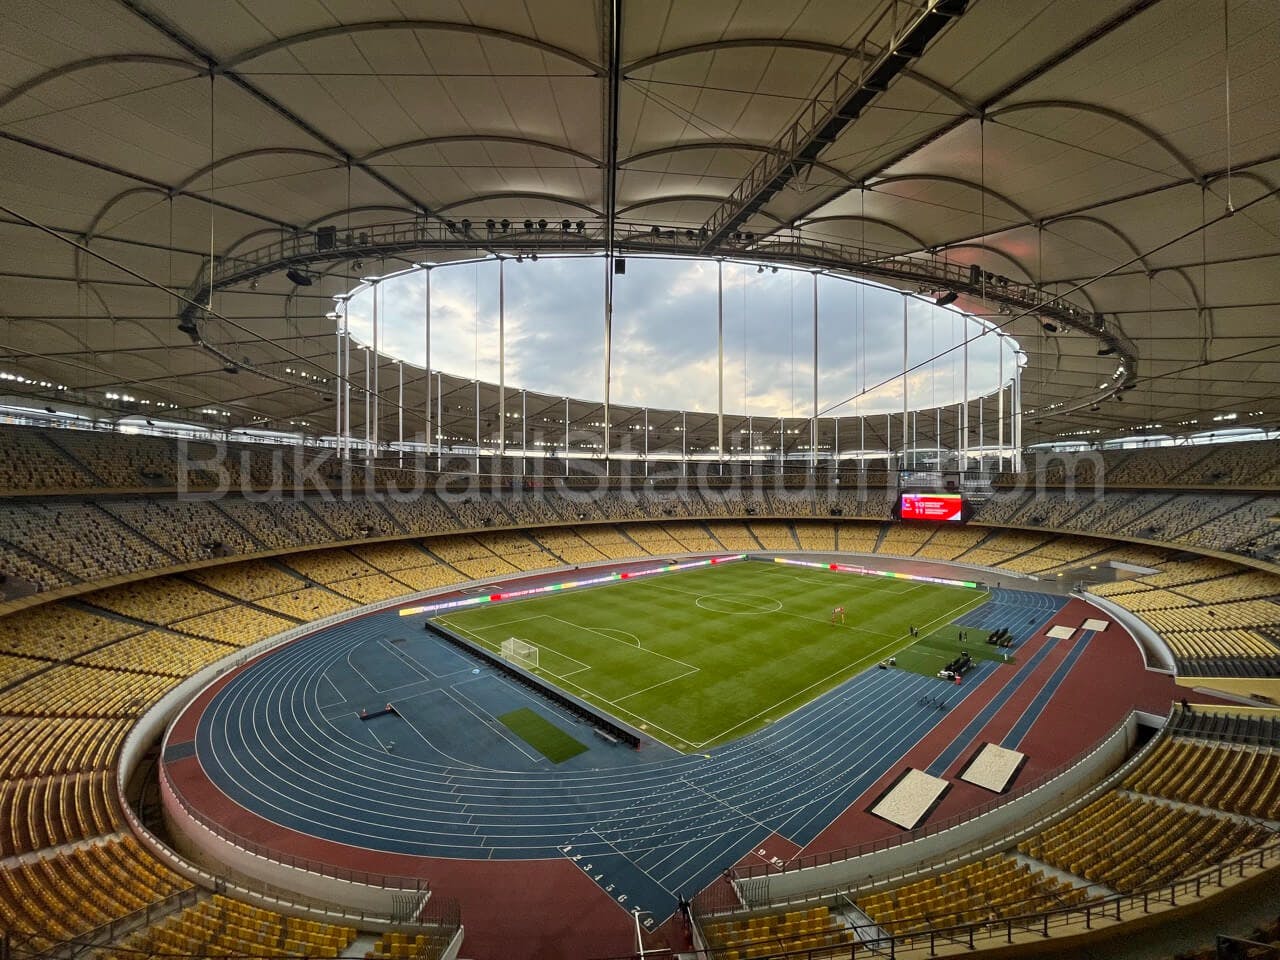 0.5x View of Bukit Jalil field from section 302 of Stadium Bukit Jalil.